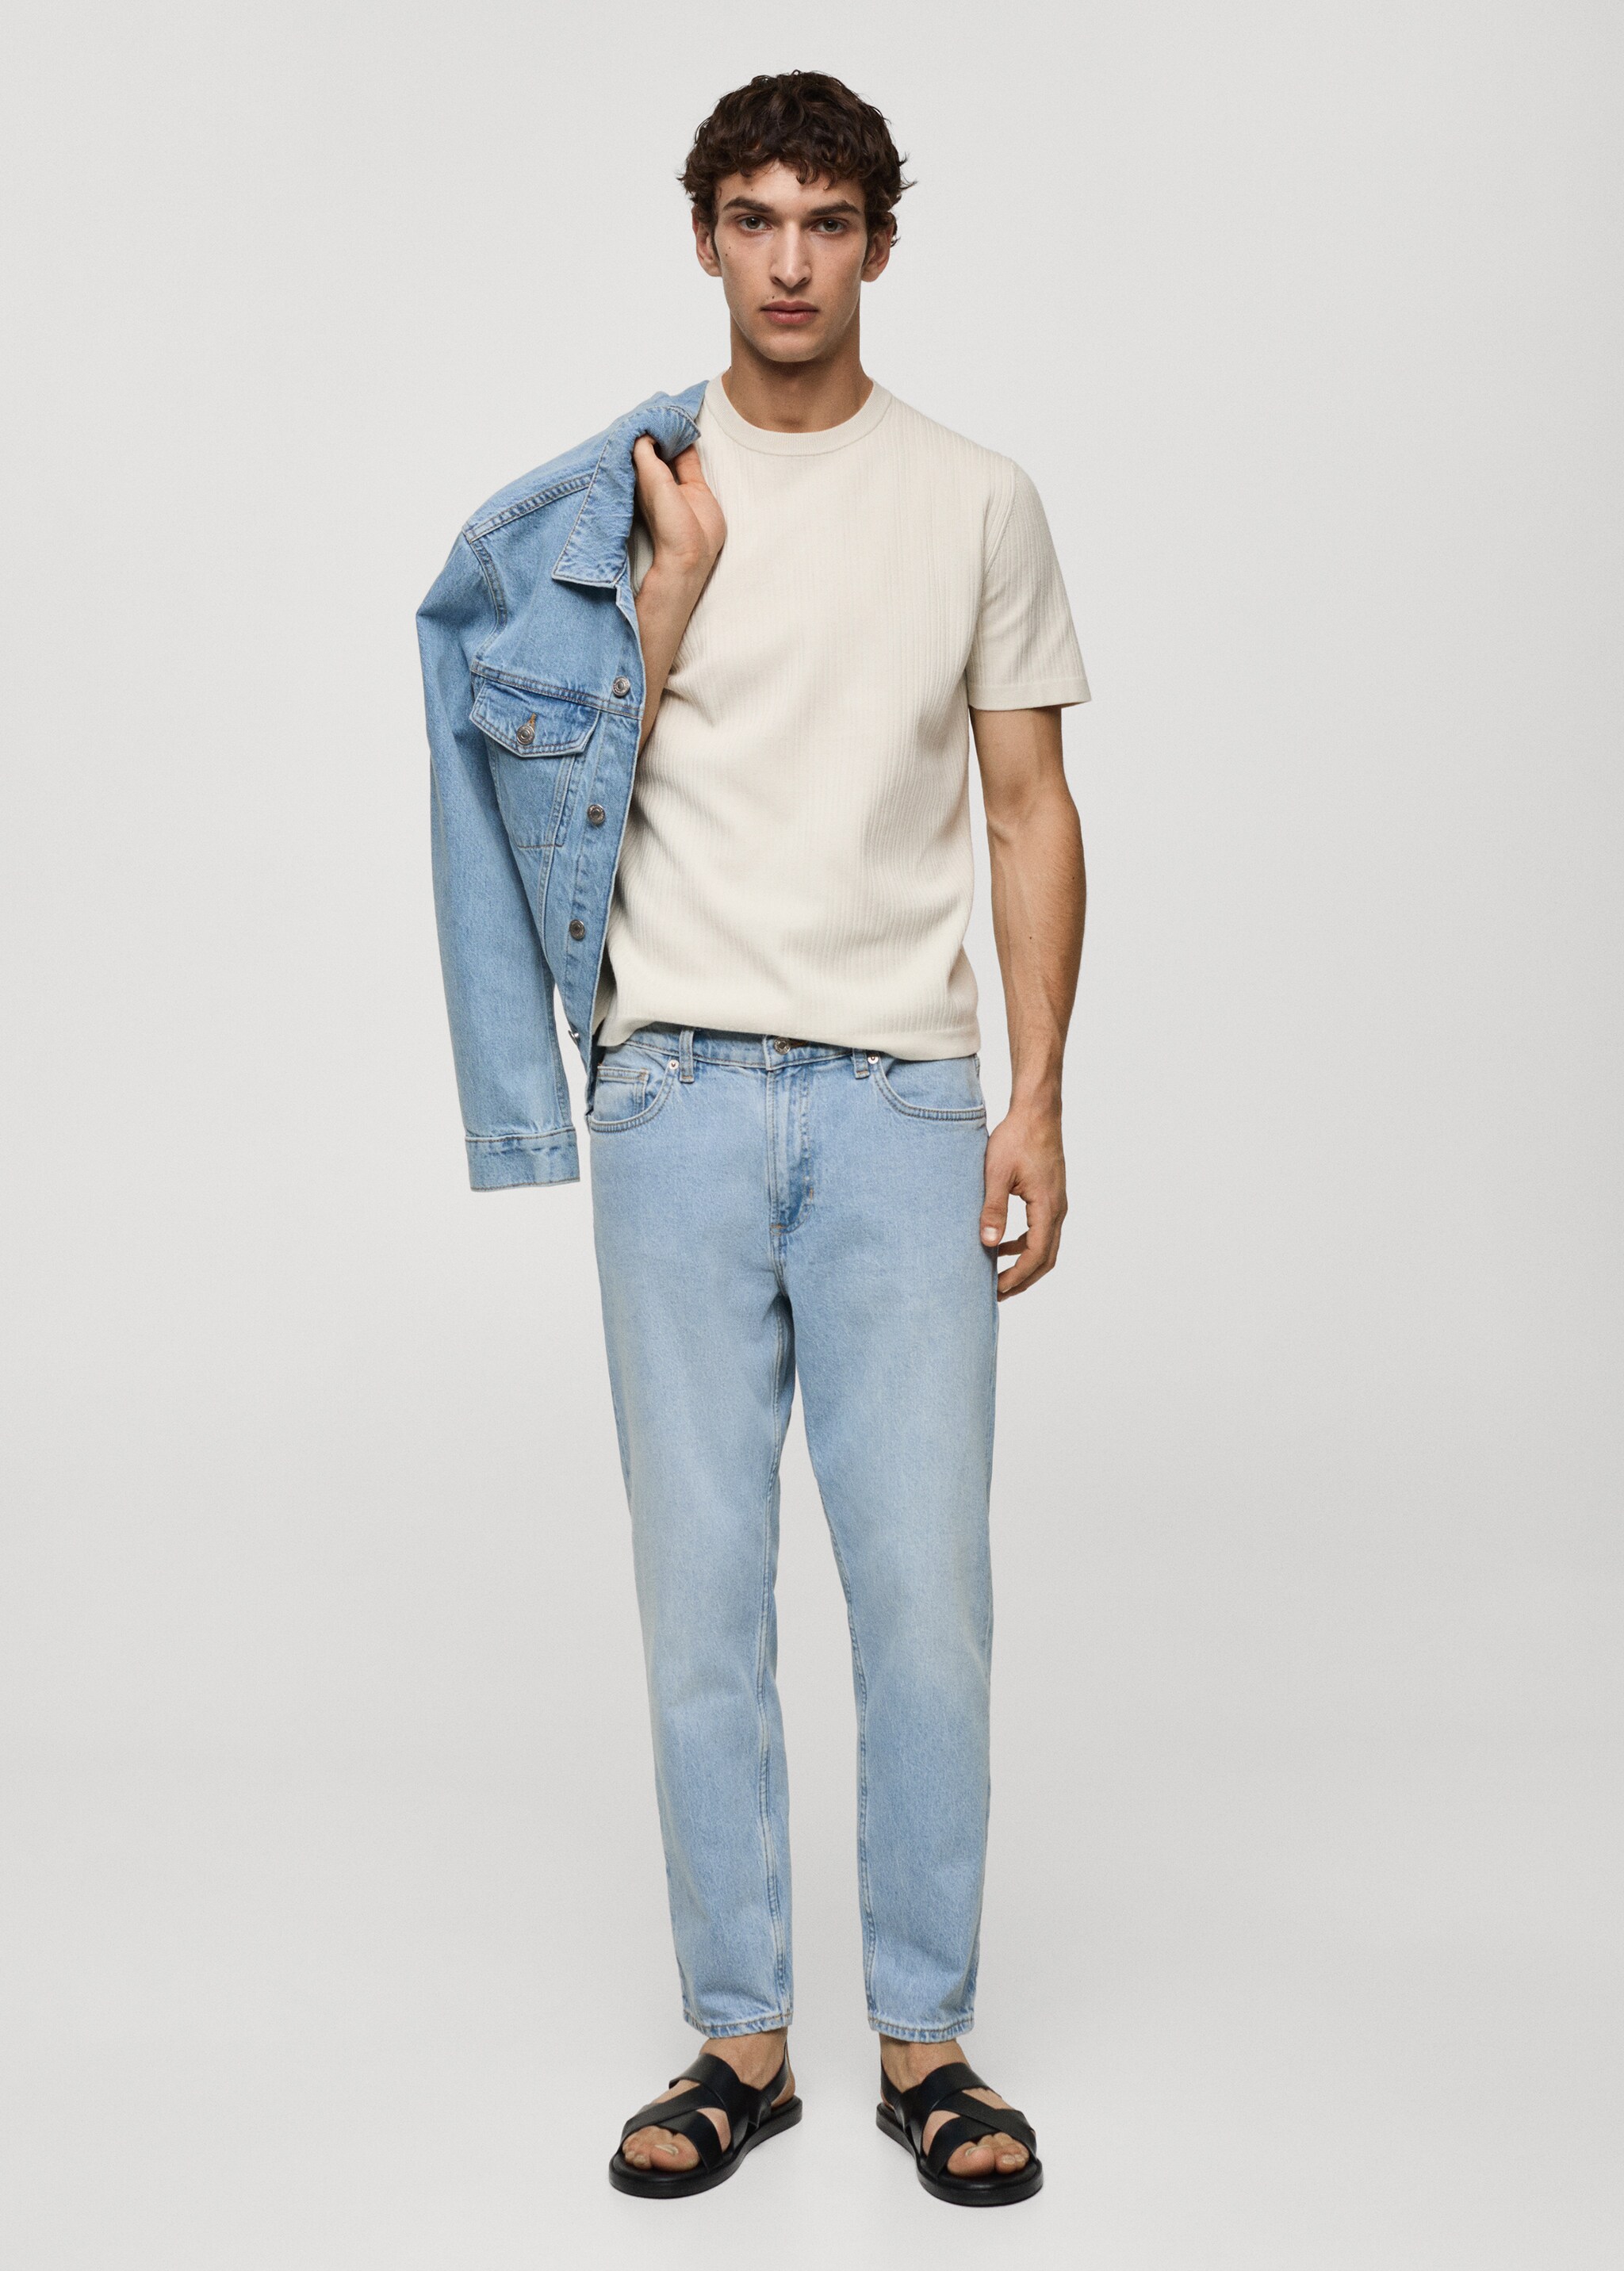 Ben tapered fit jeans - General plane